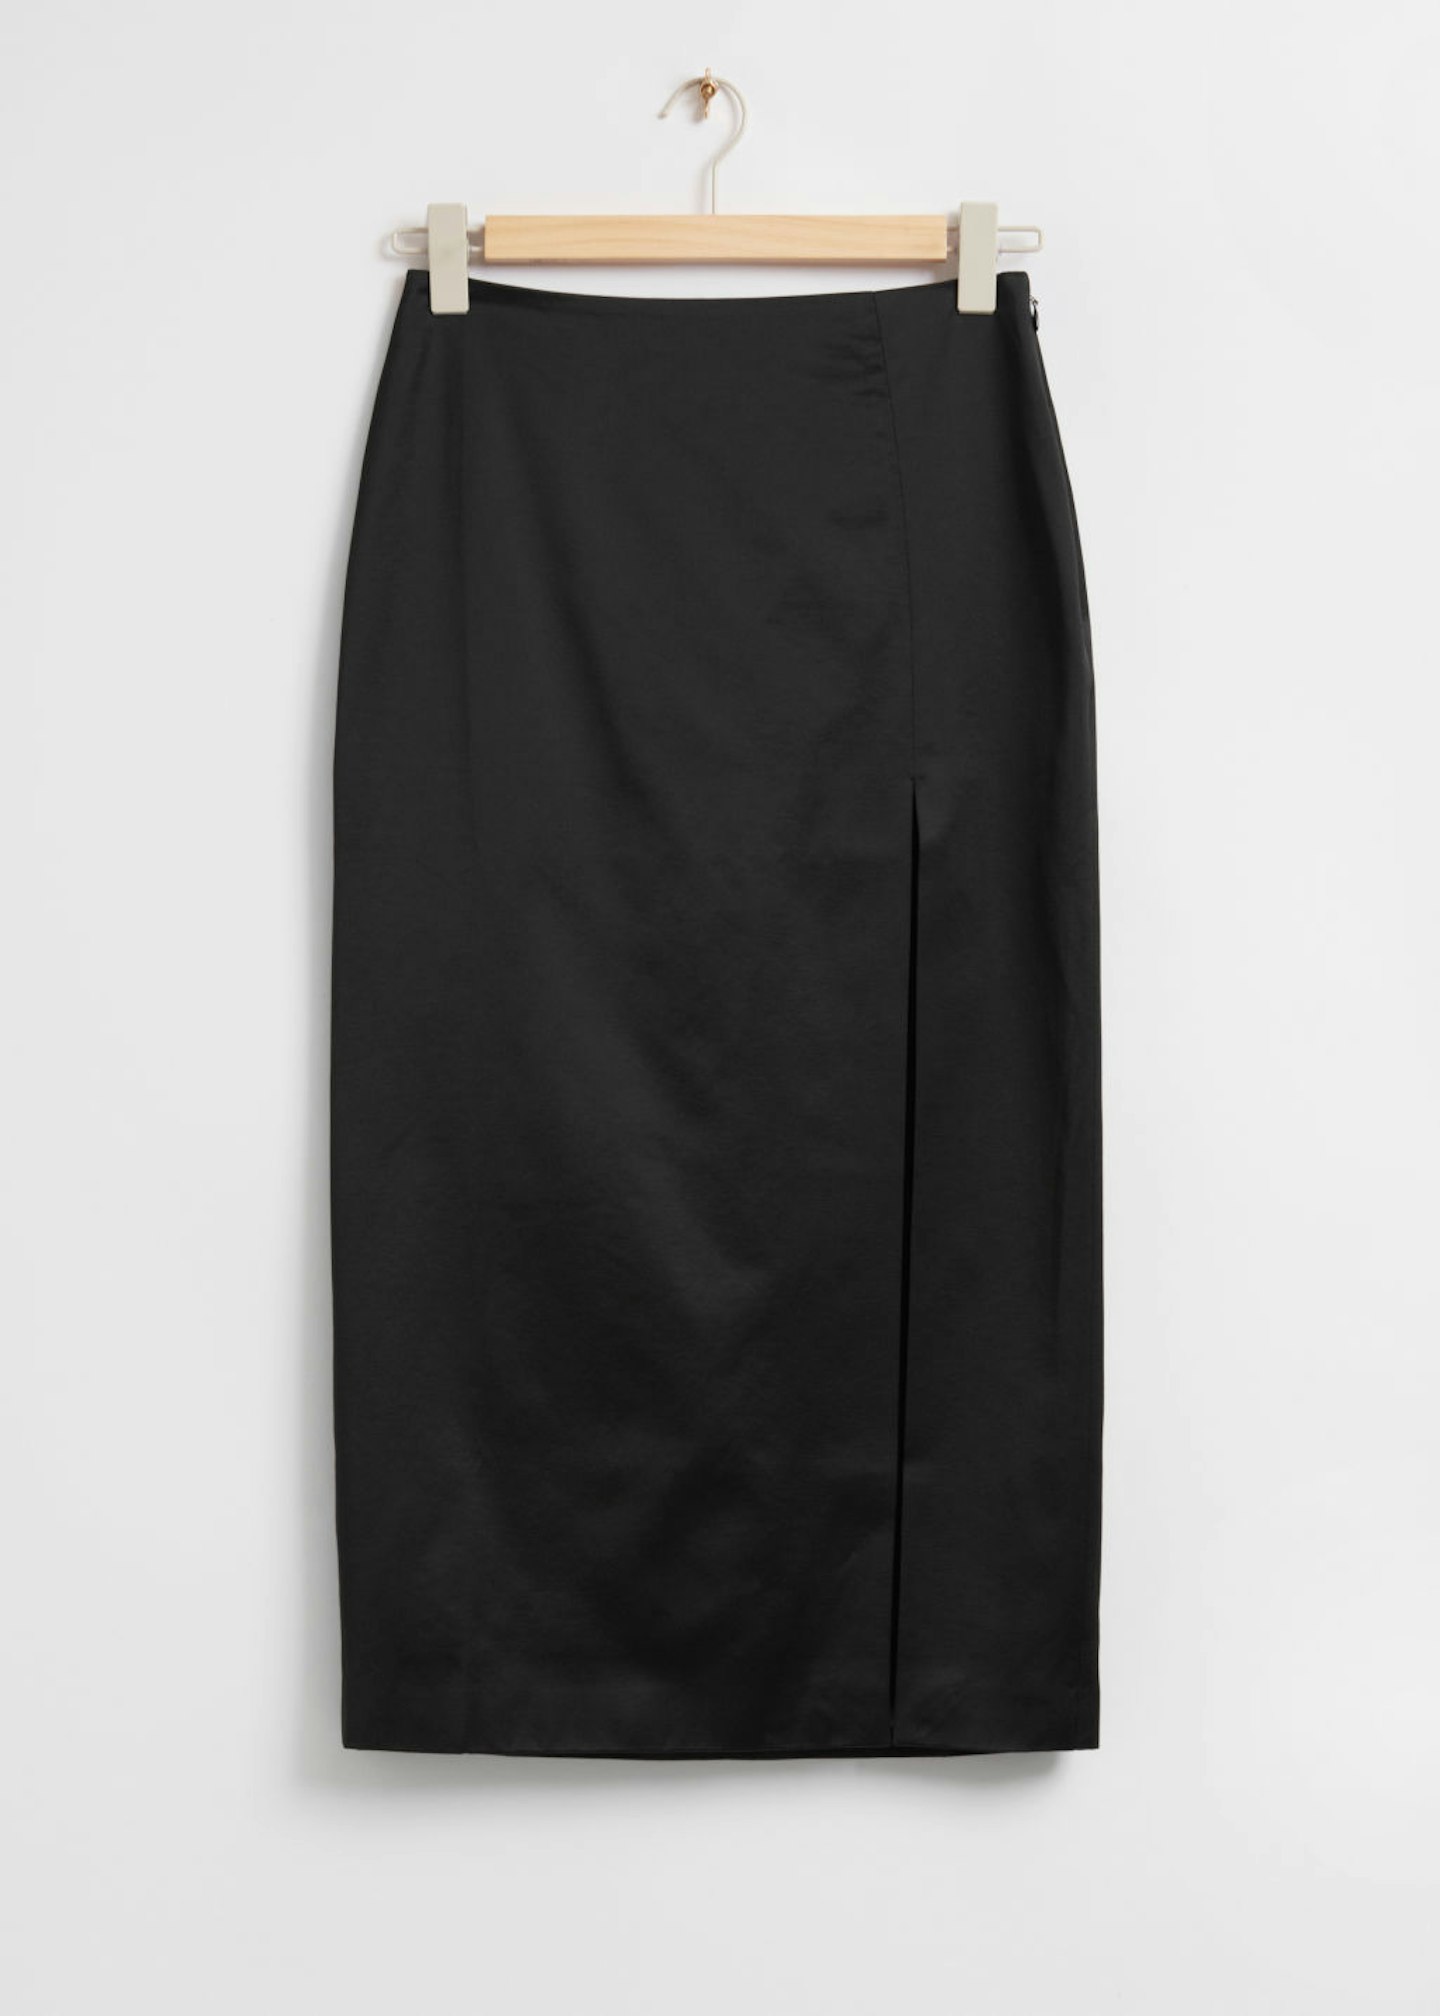 & Other Stories, Fitted Midi Slit Skirt